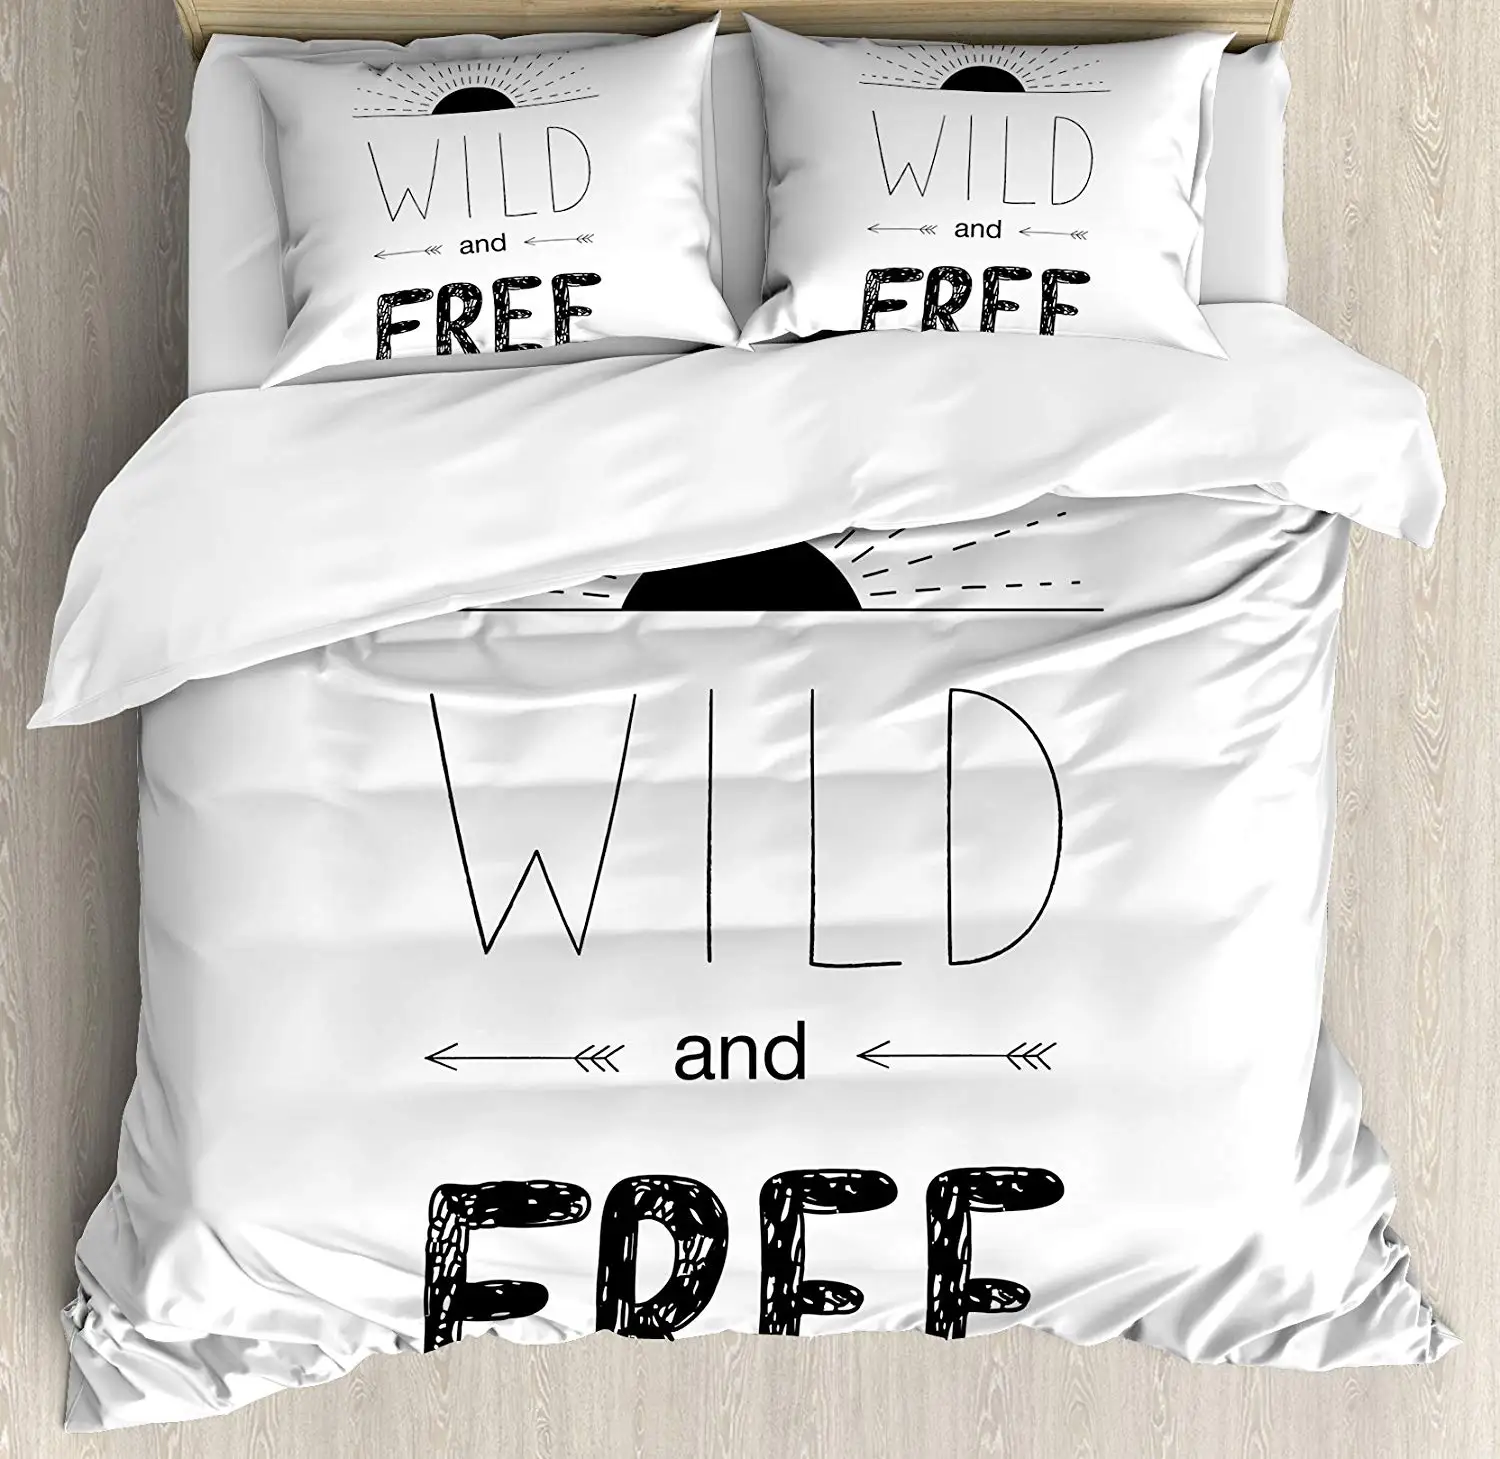 Фото Adventure Duvet Cover Set Abstract Hand Drawn Rising Sun Arrows Wild Free Forest Sketch Art Design Decorative 3 Piece Bedding | Дом и сад